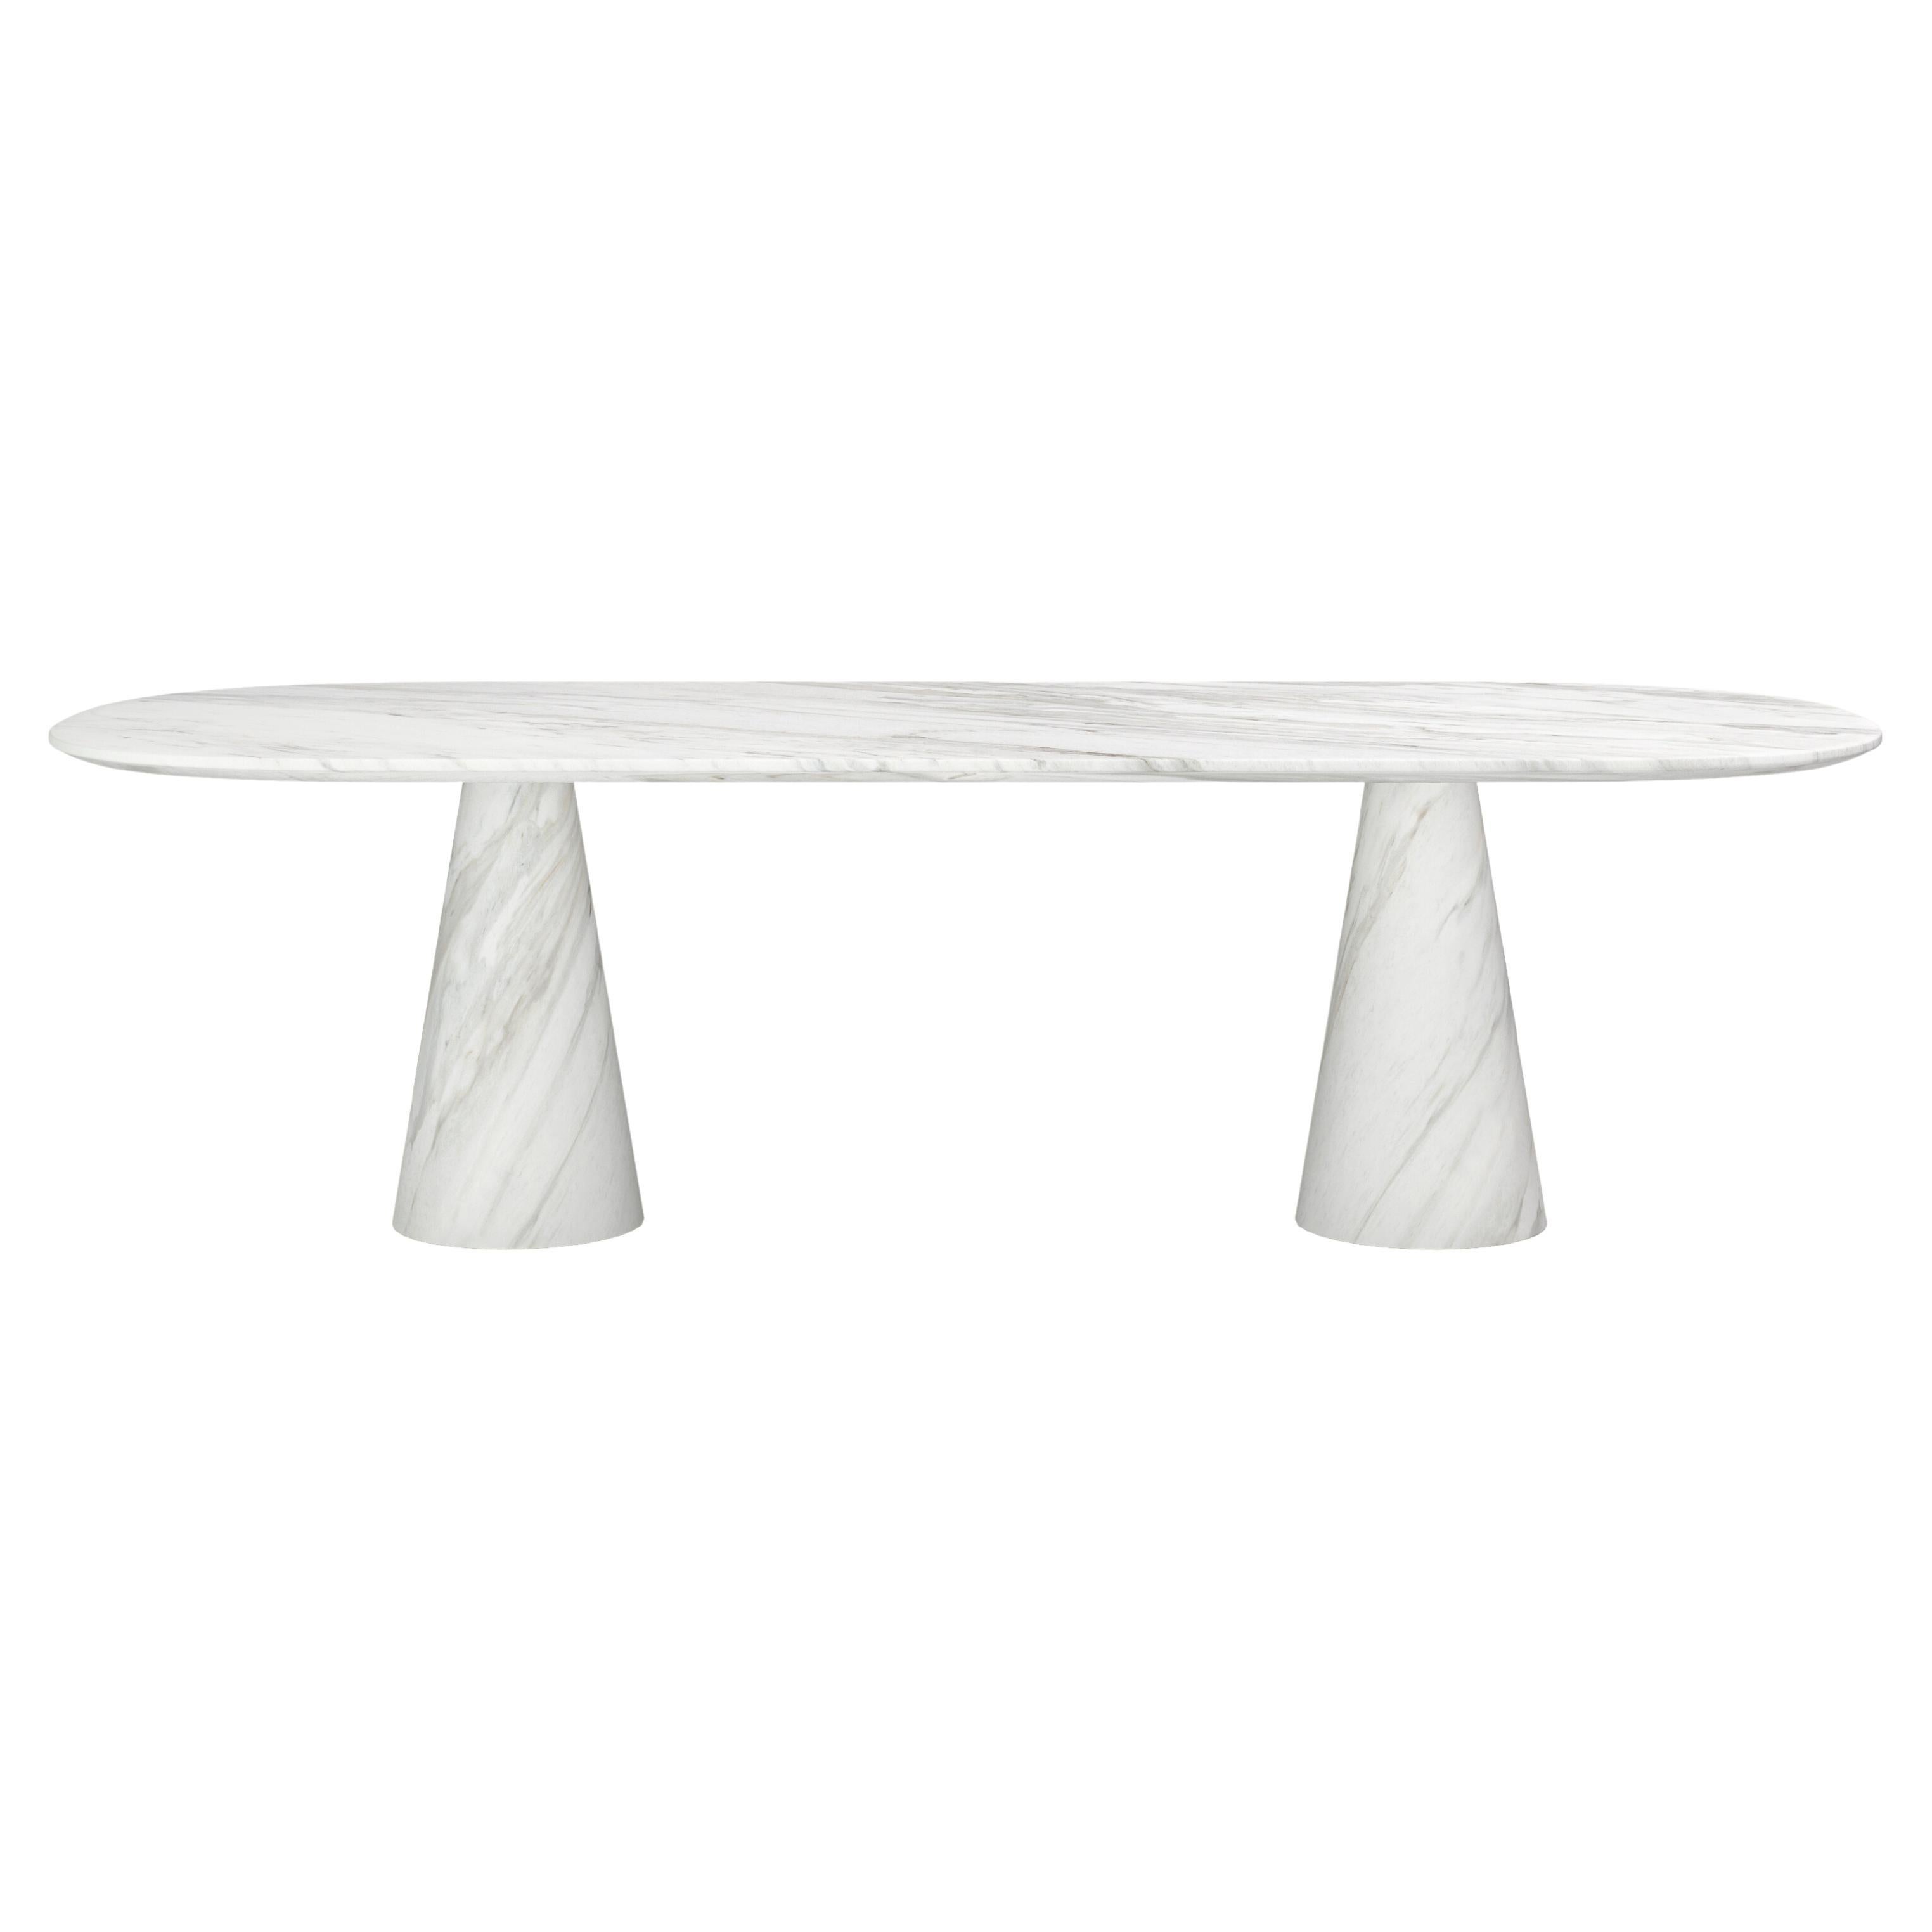 FORM(LA) Cono Oval Dining Table 84”L x 42”W x 30”H Volakas White Marble For Sale